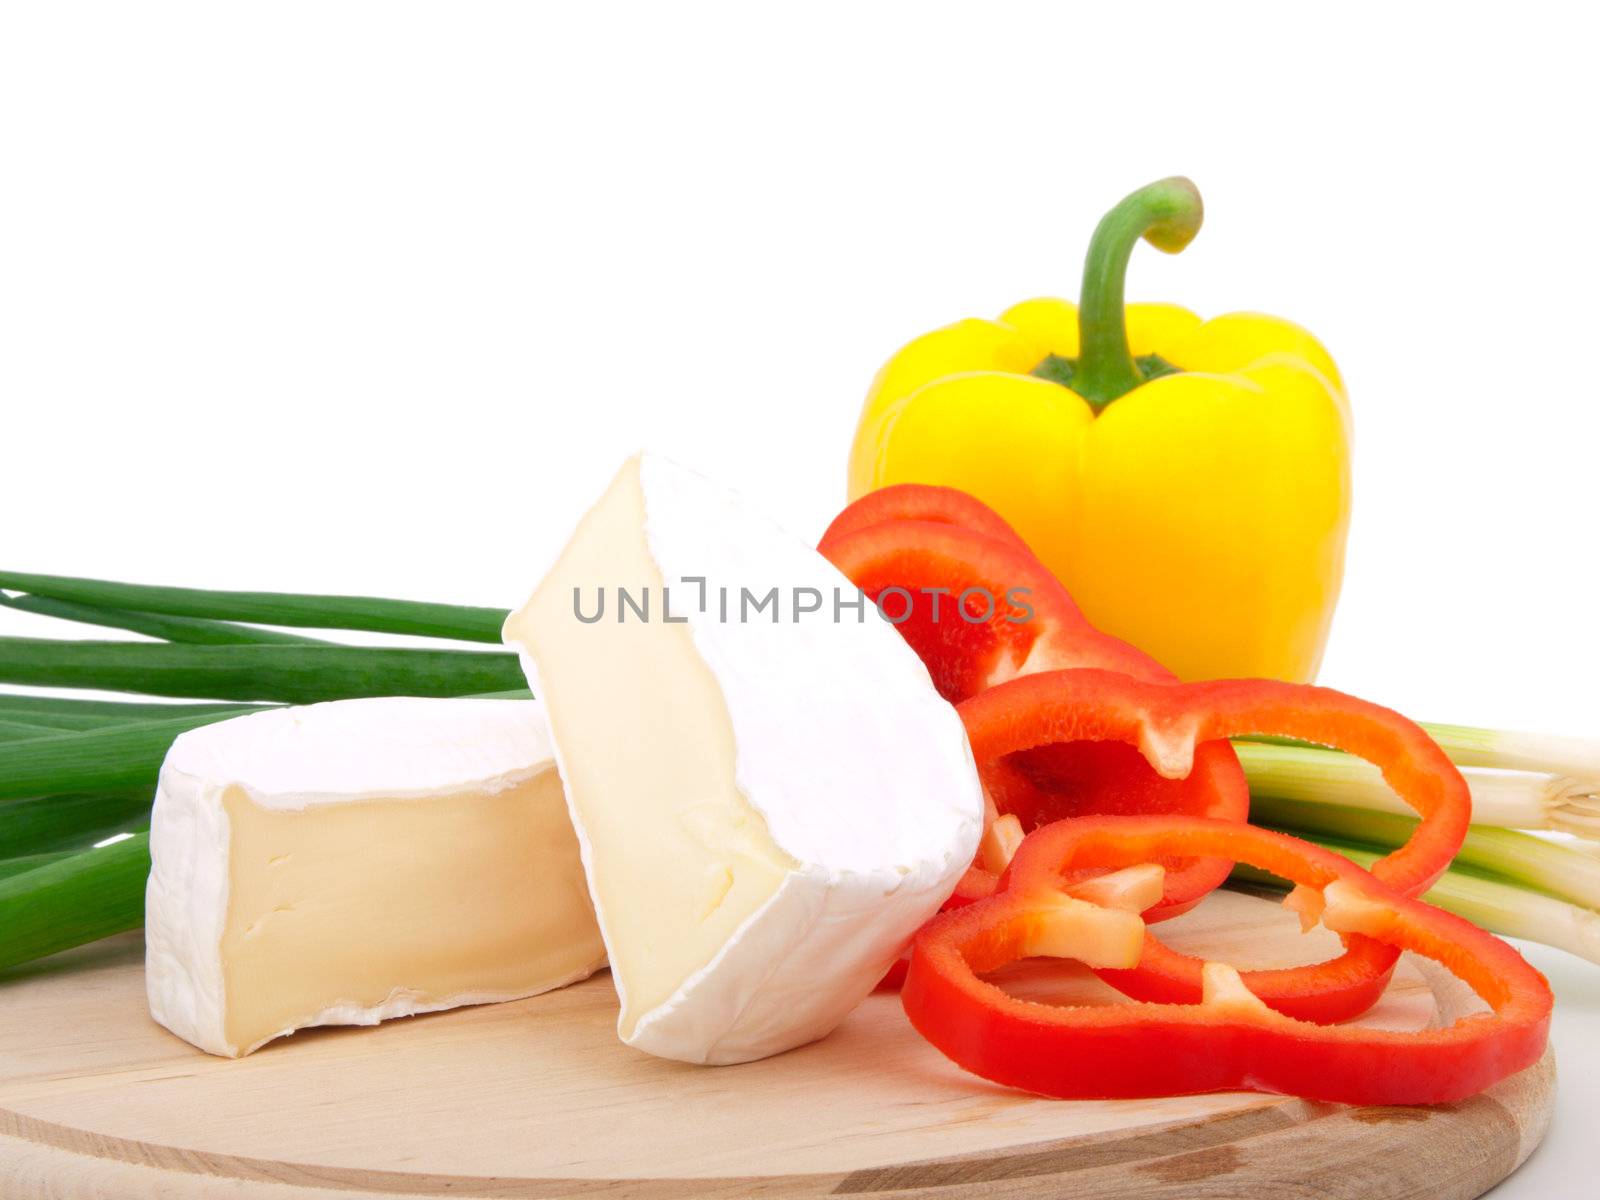 Wheel of French cheese with vegetables (onion, paprika), on white background 